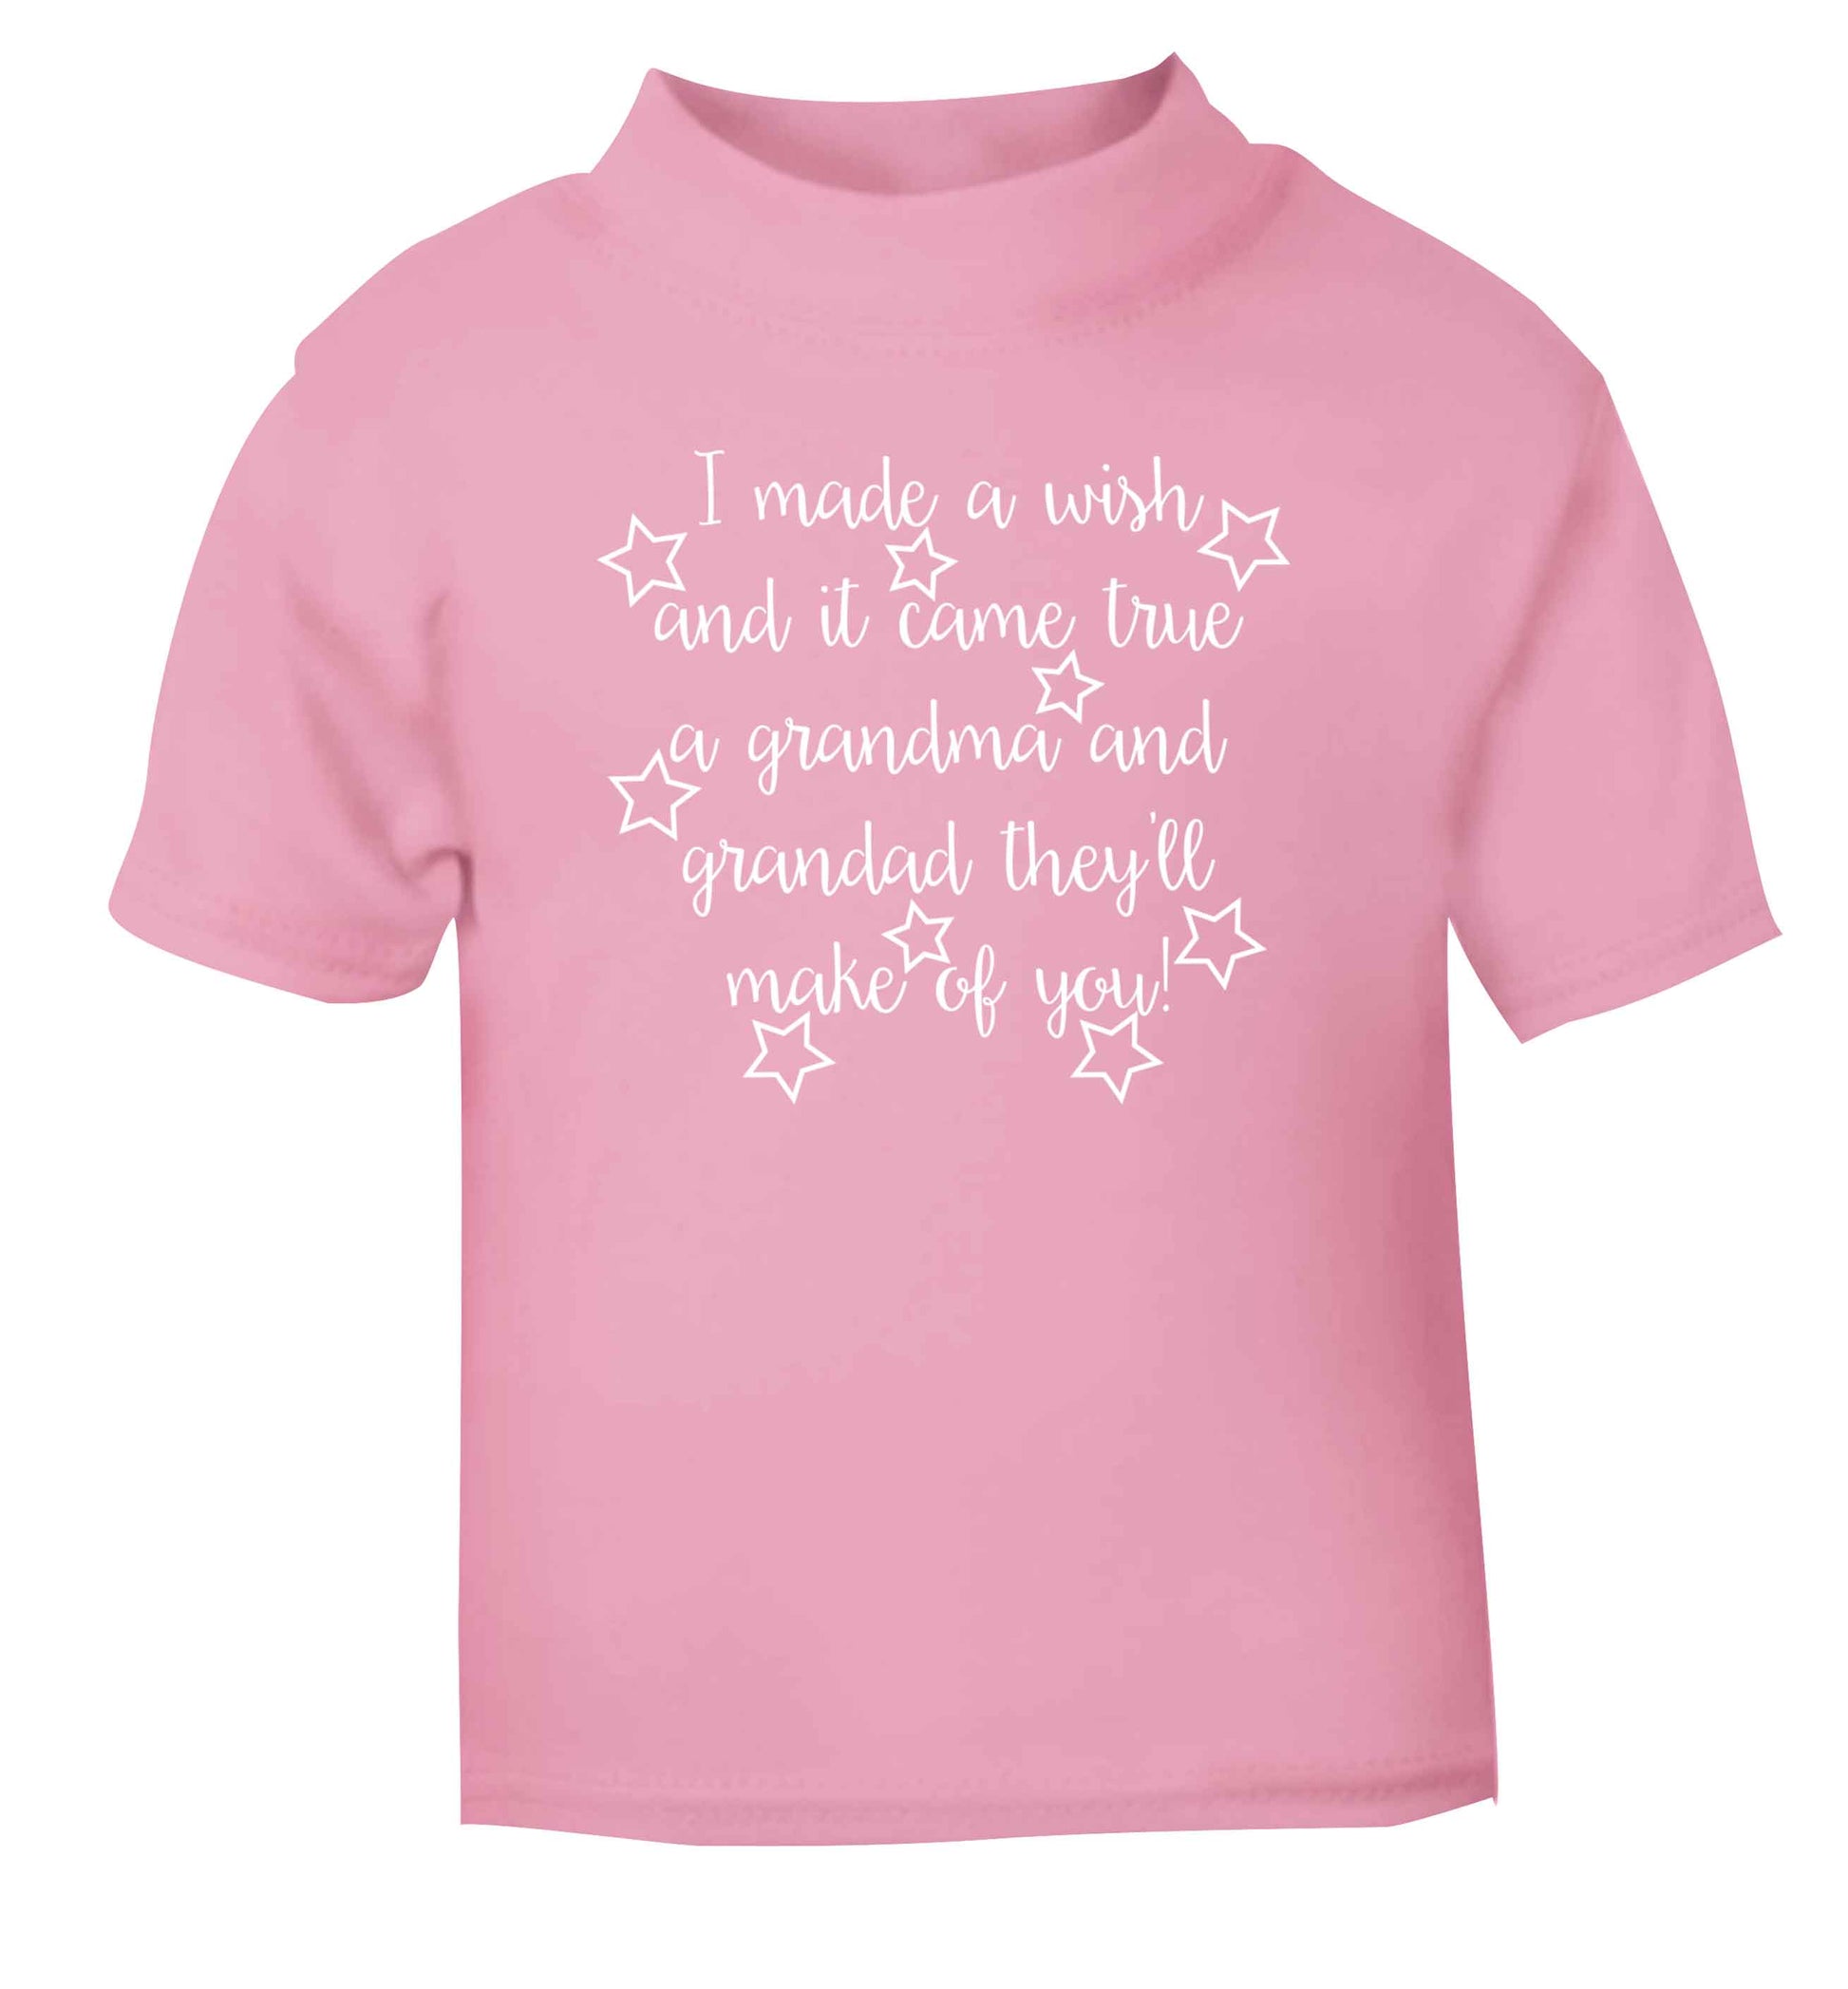 I made a wish and it came true a grandma and grandad they'll make of you! light pink Baby Toddler Tshirt 2 Years